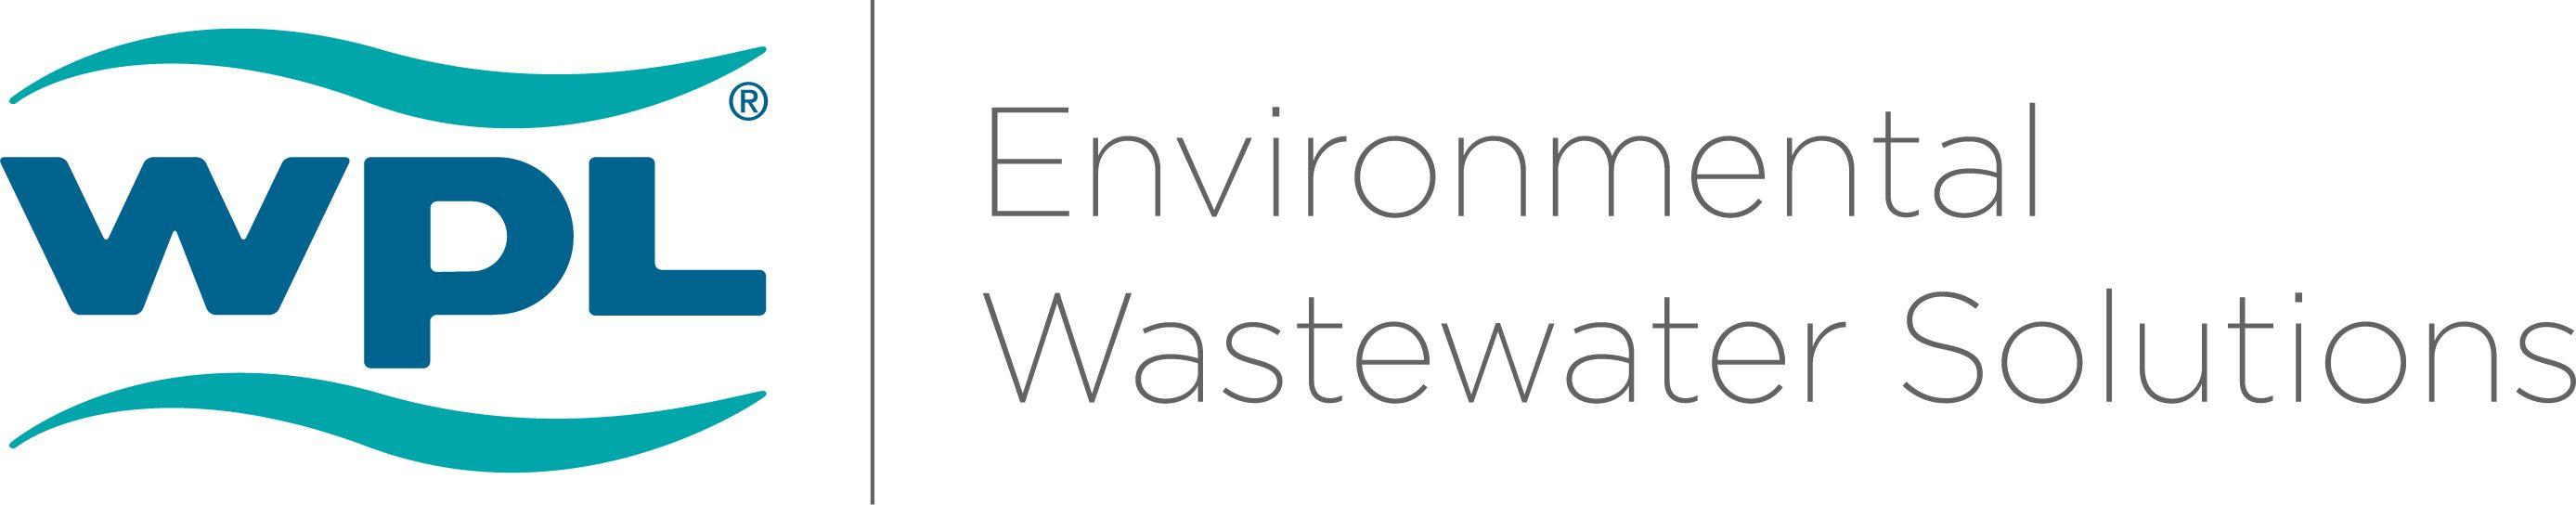 WPL Logo - WPL Environmental Wastewater Treatment Solutions - wastewater ...